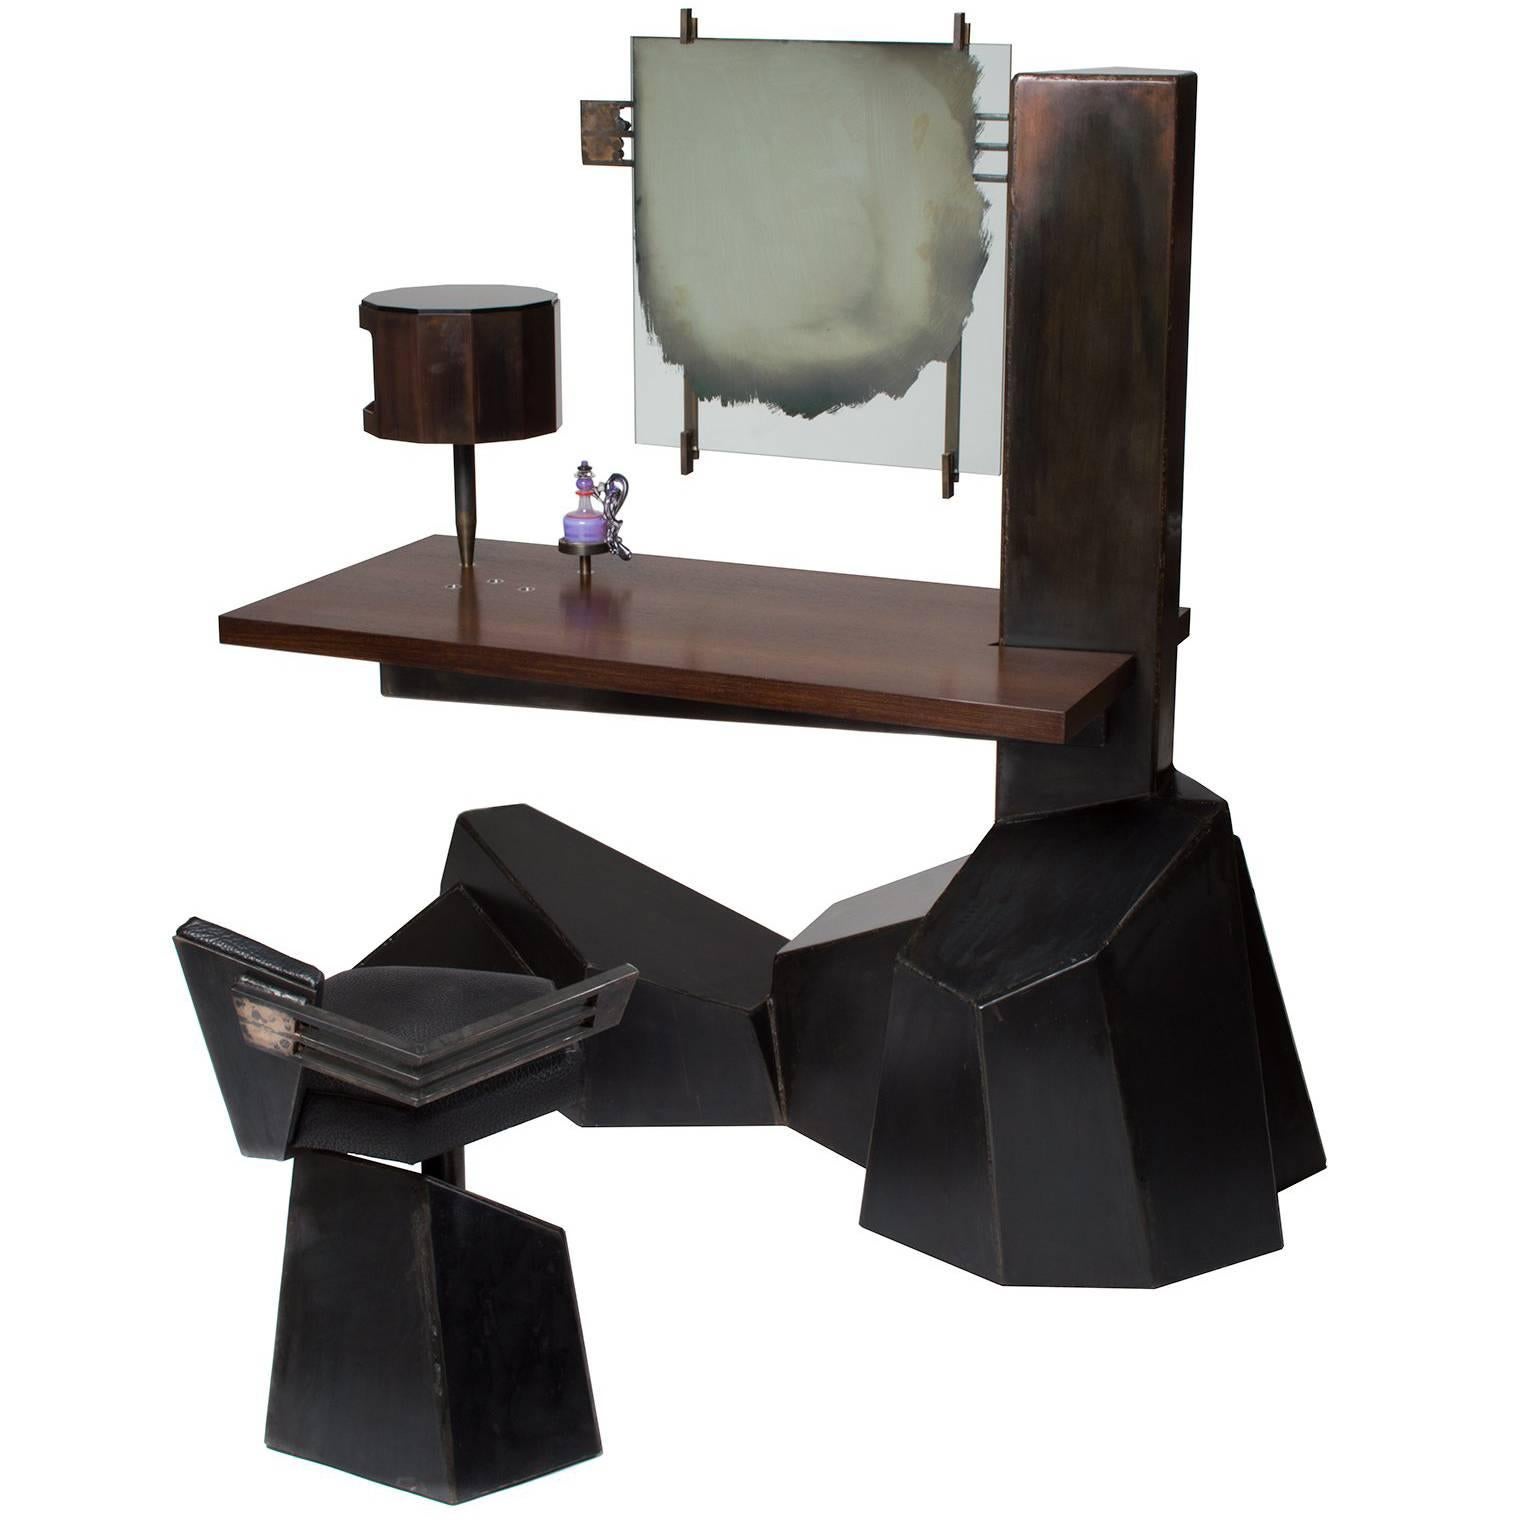 Datum Vanity, Leather Upholstered Chair, Mirror & Perfume Bottle Set of Five For Sale